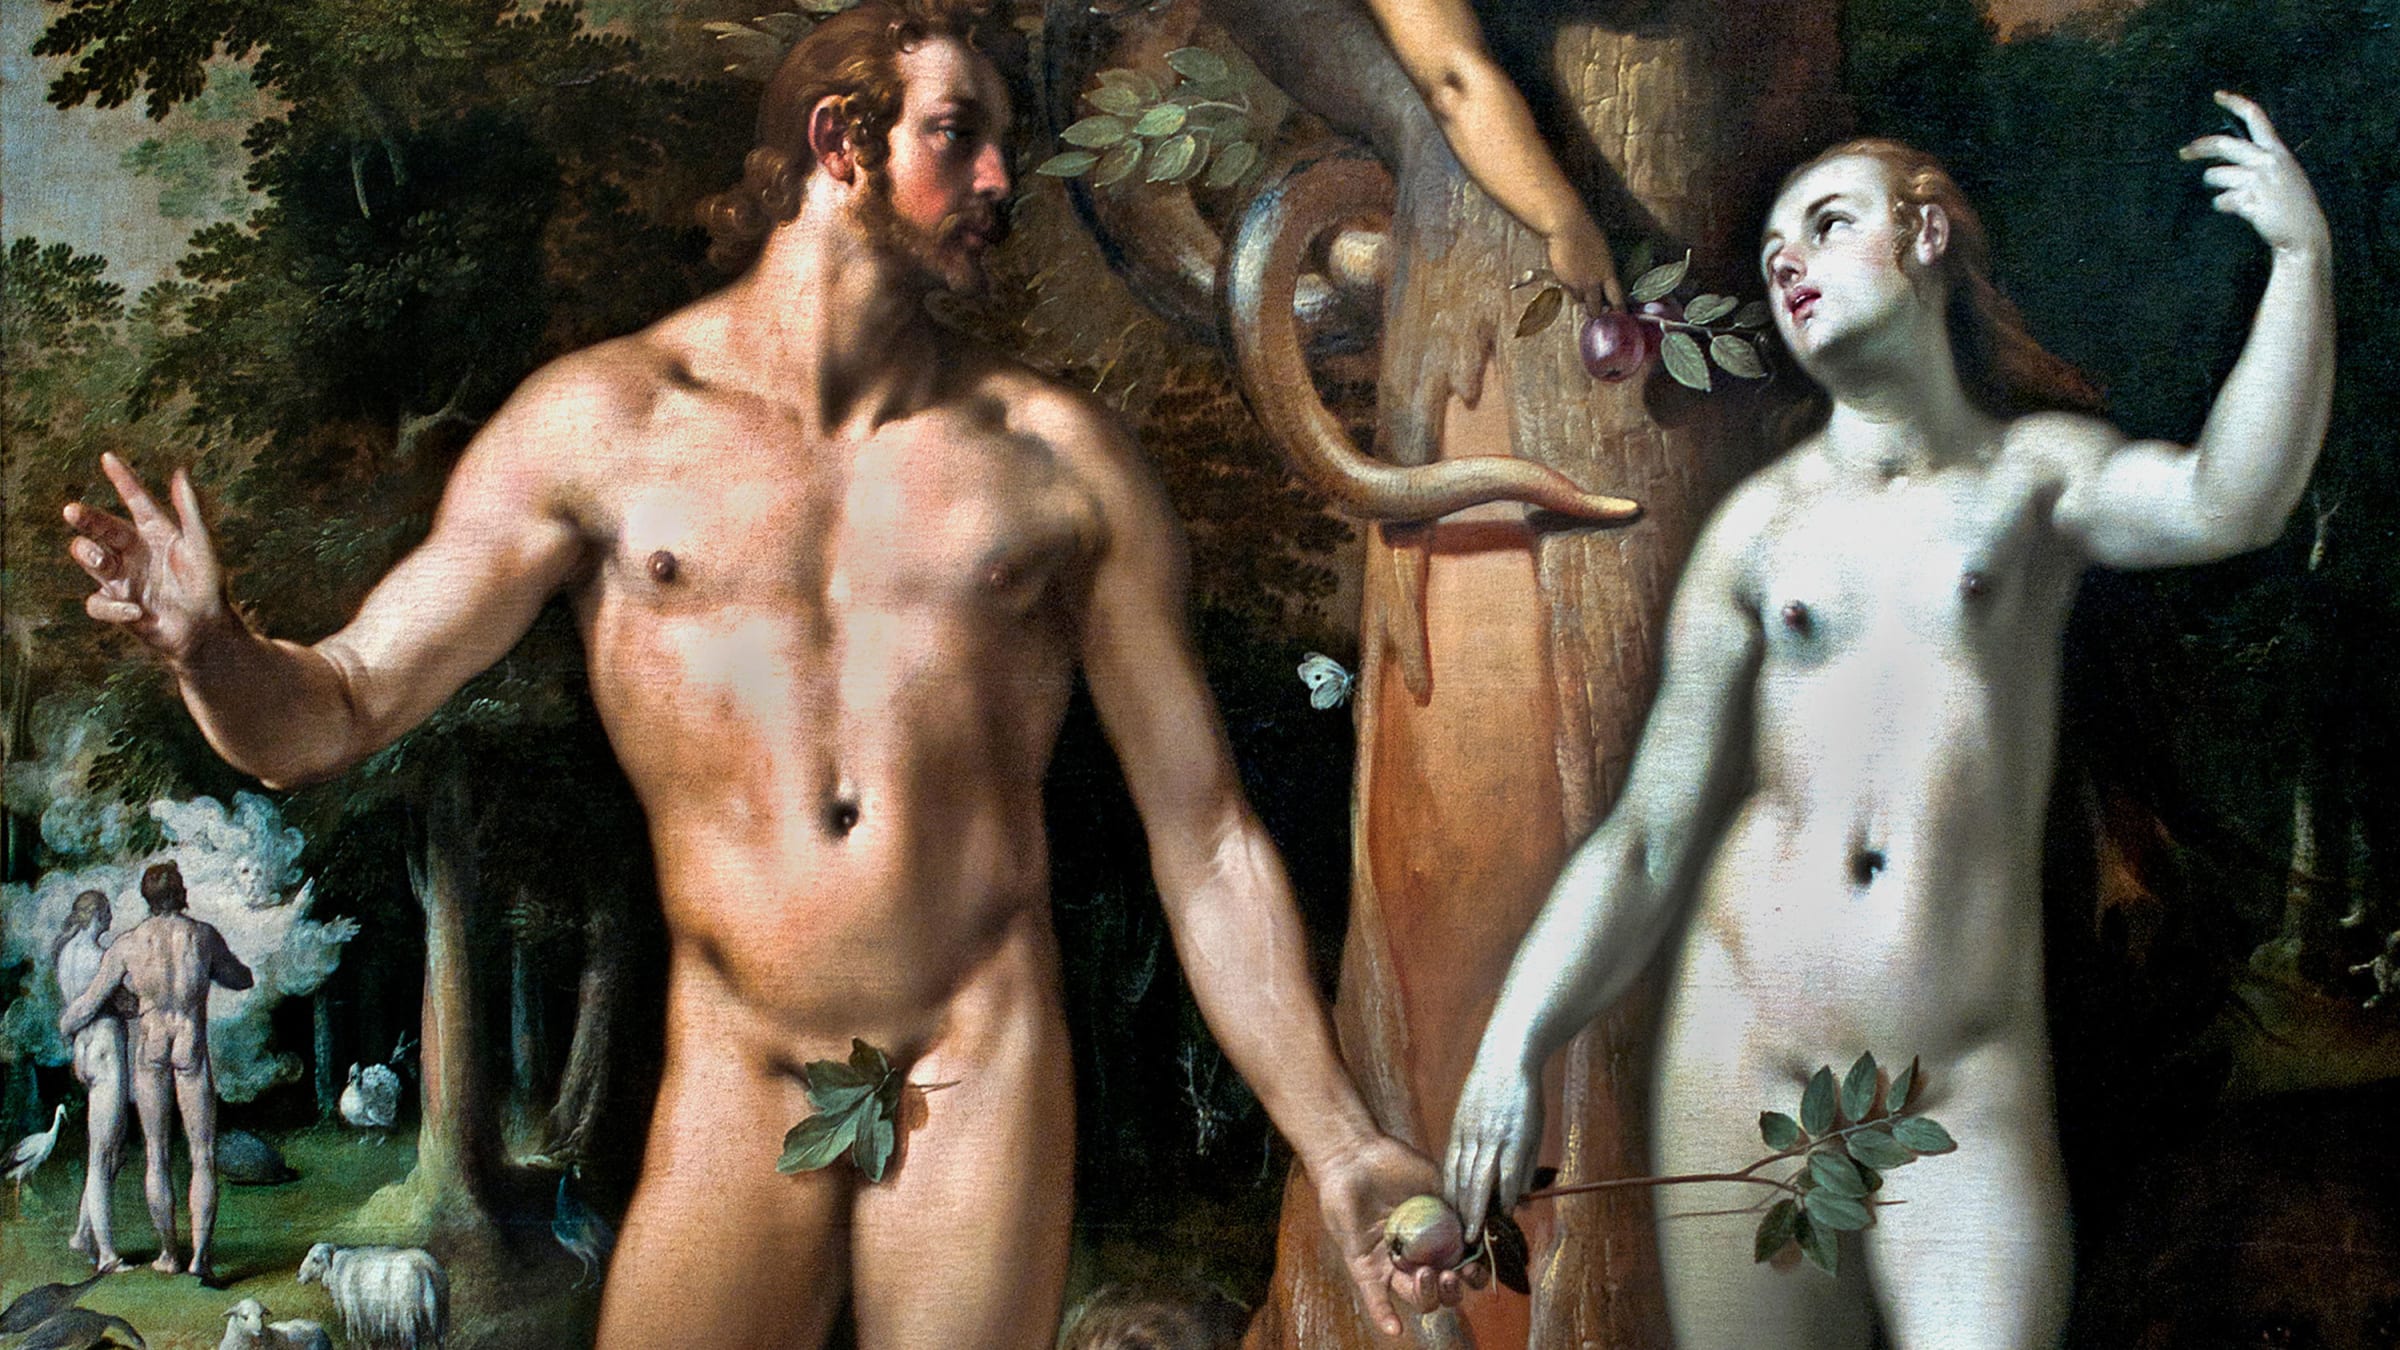 Was Eve Made from Adams Missing Penis Bone?